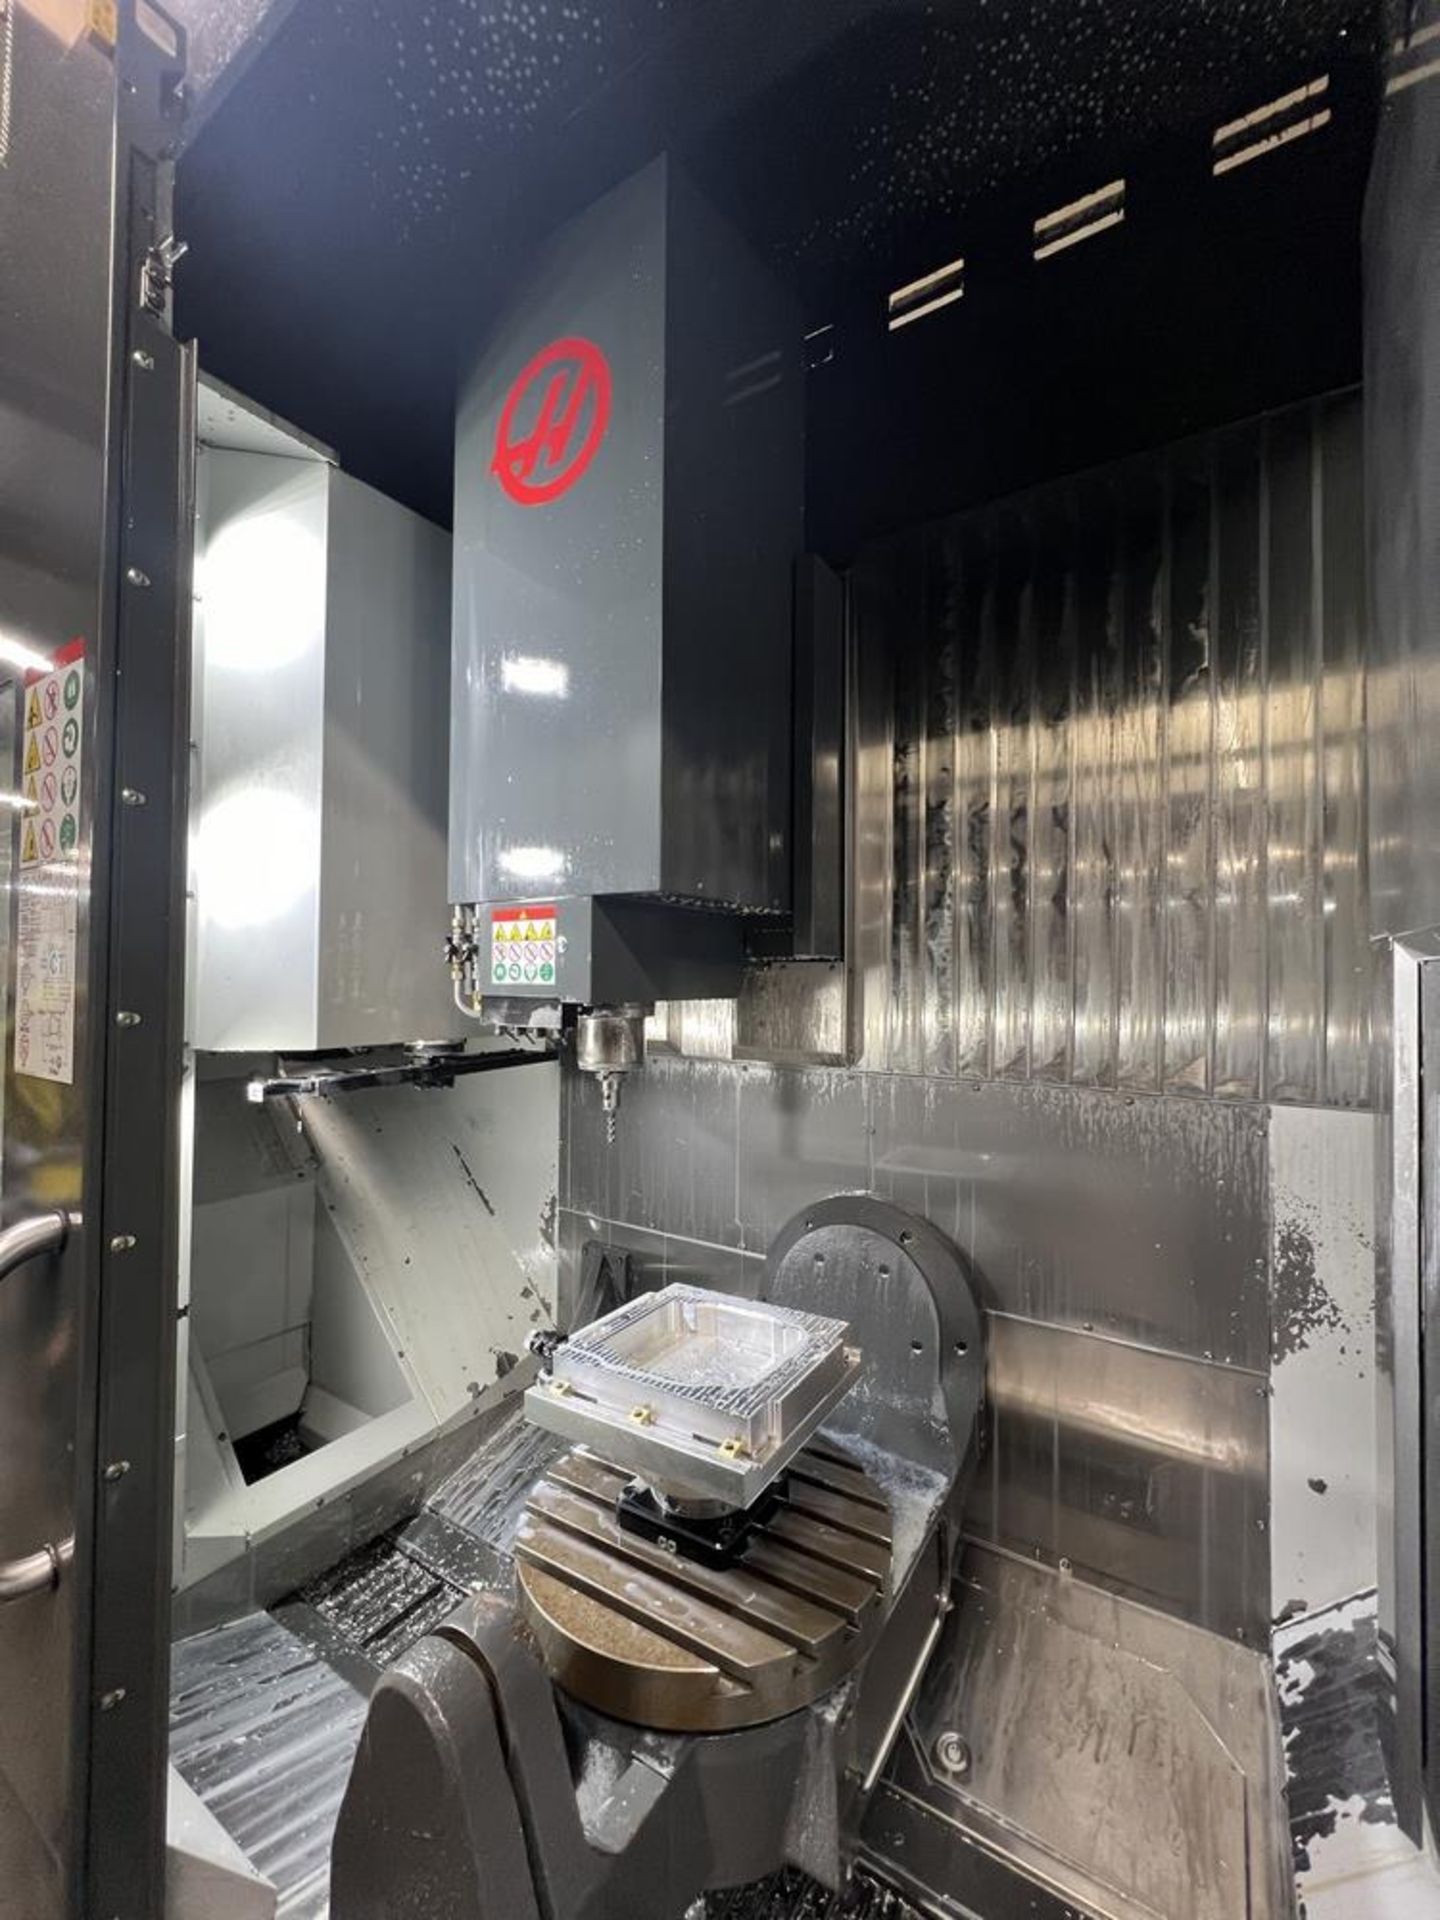 2019 Haas UMC 750 Vertical Machining Center, With Trinity Robot F 242379 AX5 Fanuc Robot Pallet - Image 25 of 34